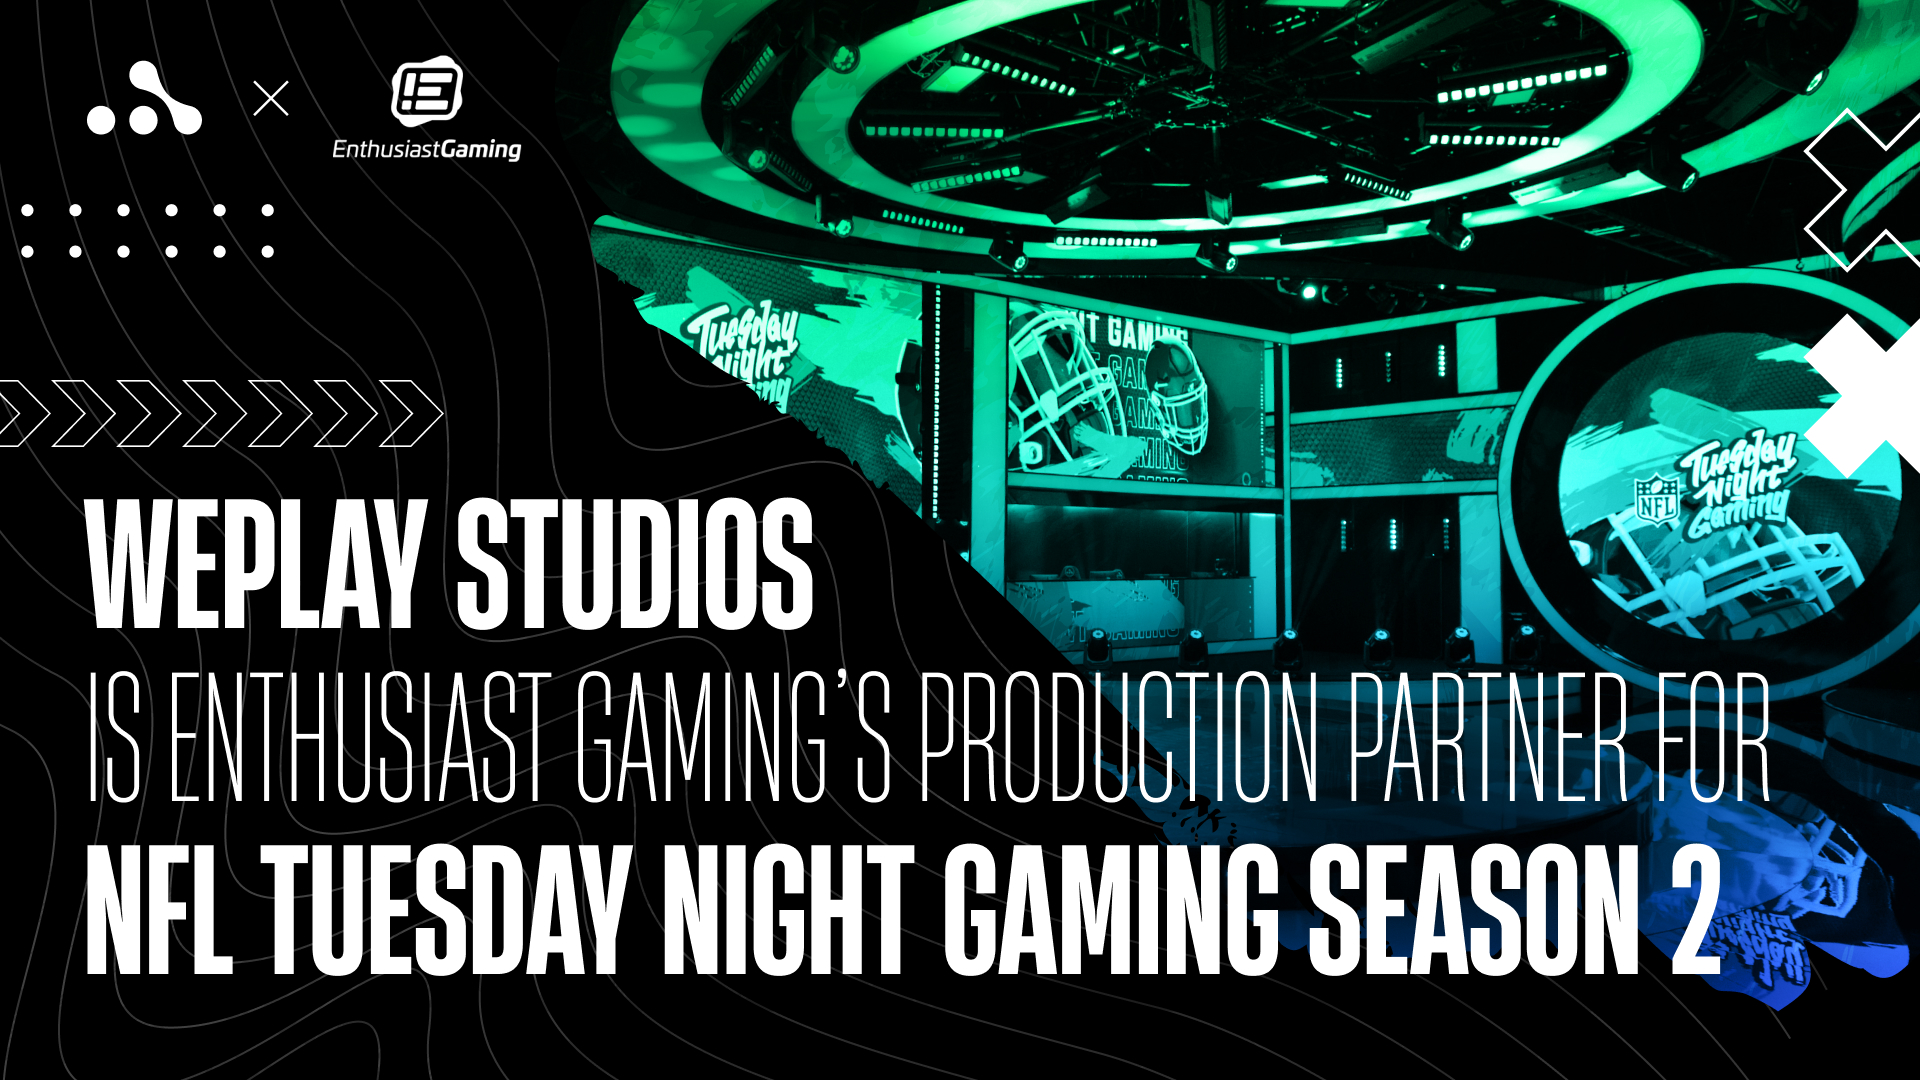 NFL Tuesday Night Gaming Returns With Season 2